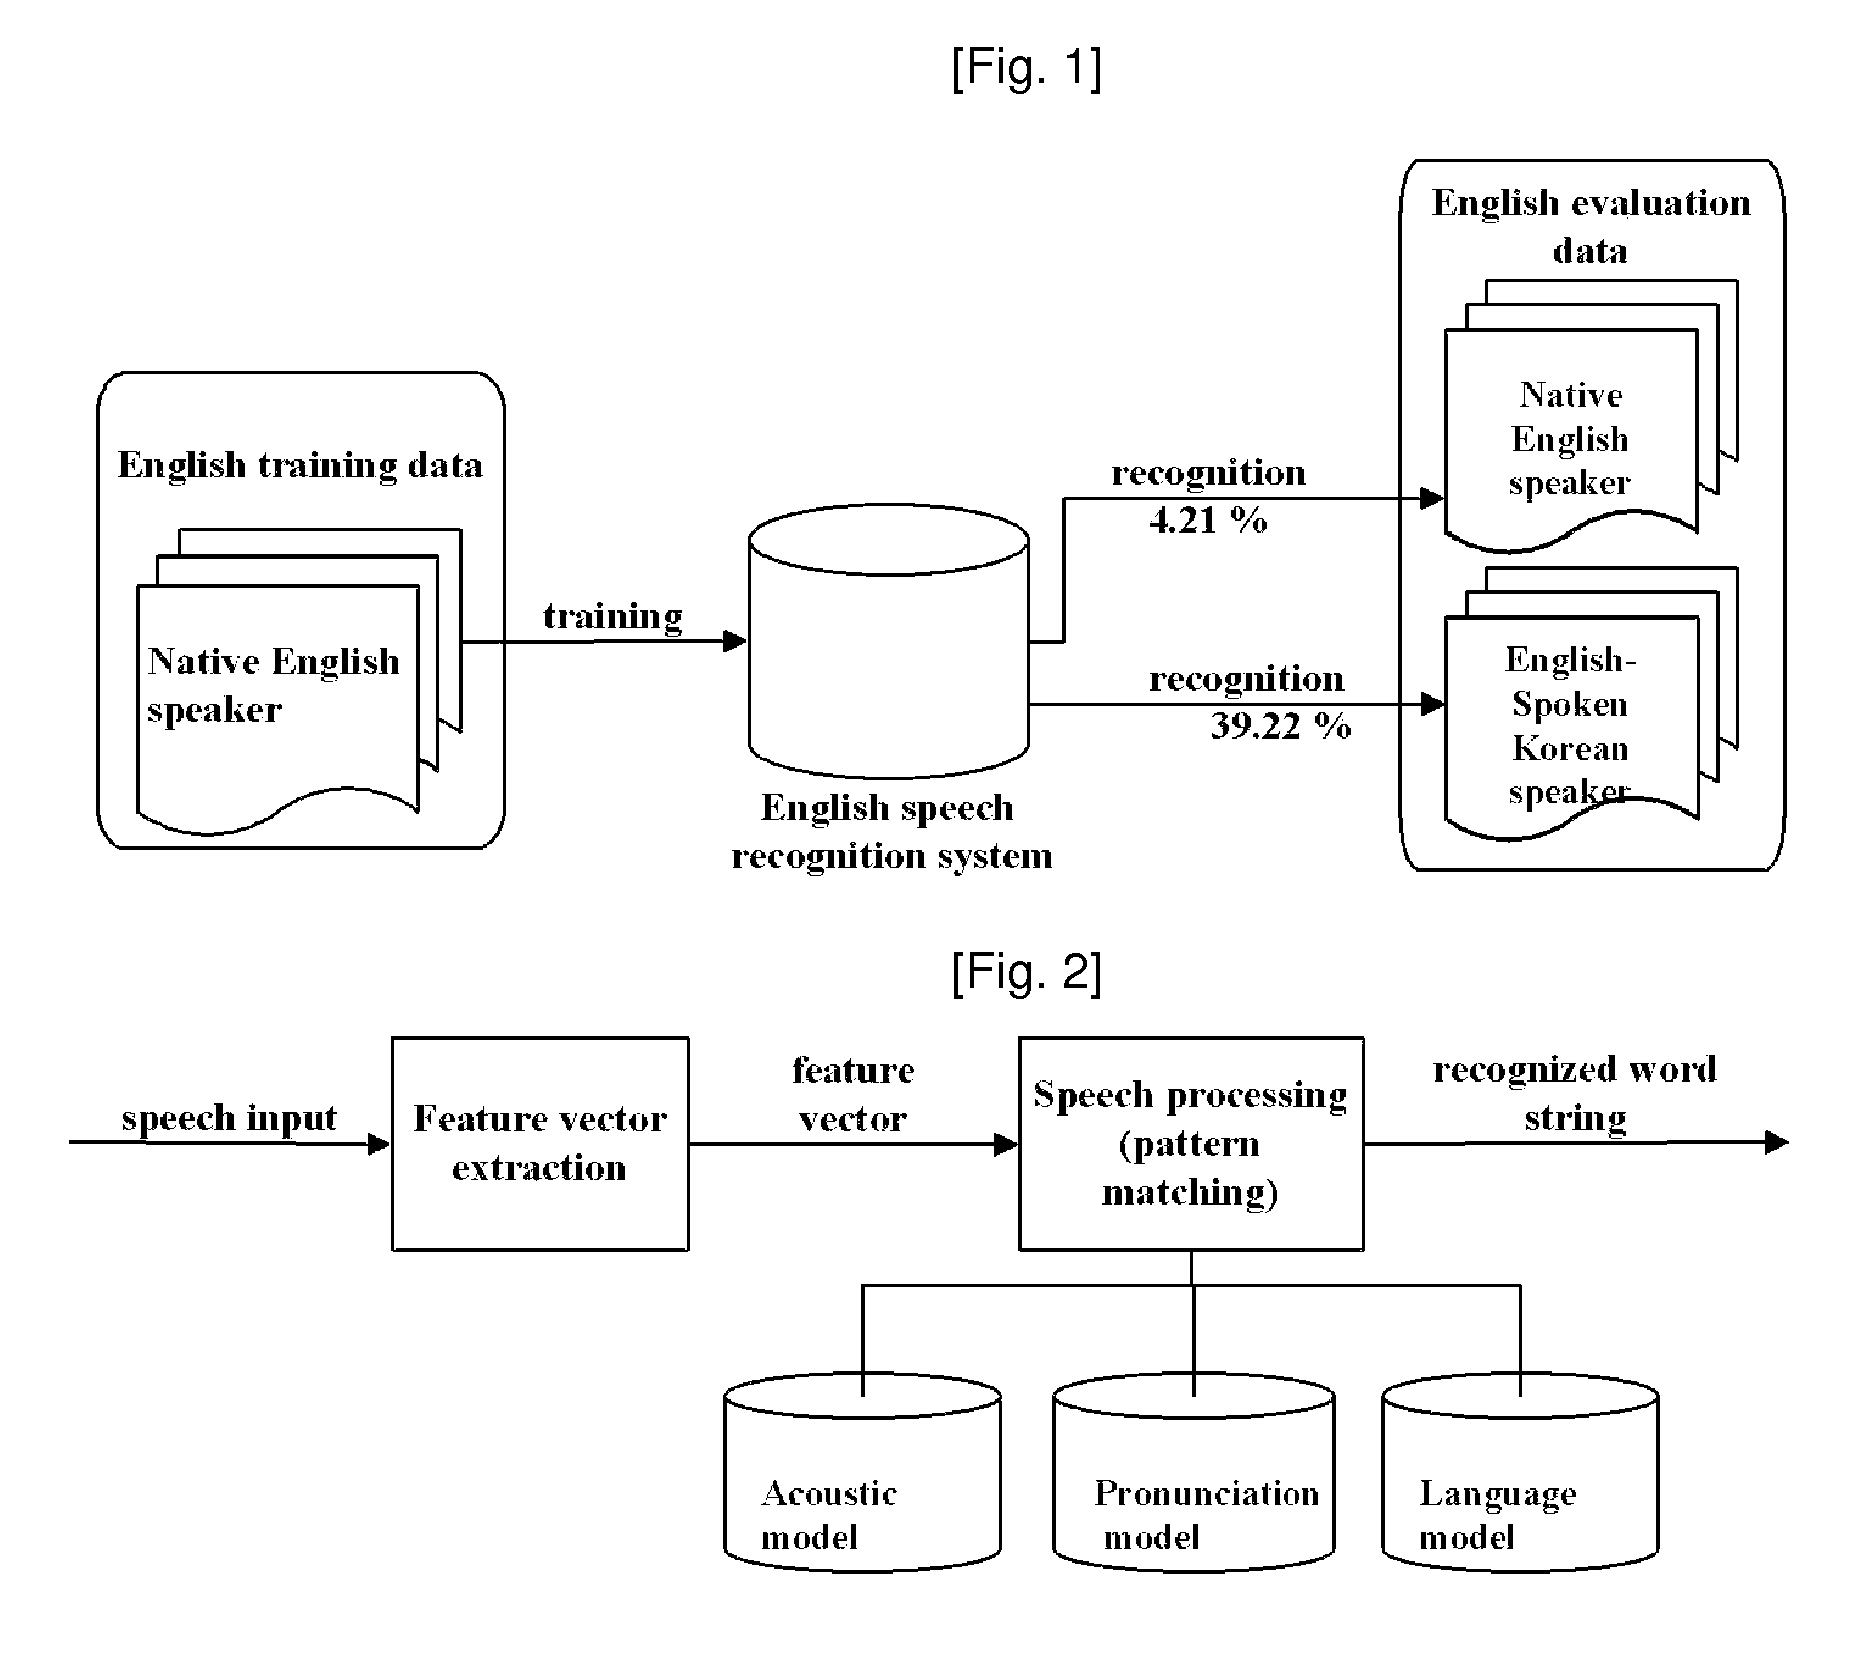 Acoustic Model Adaptation Methods Based on Pronunciation Variability Analysis for Enhancing the Recognition of Voice of Non-Native Speaker and Apparatus Thereof